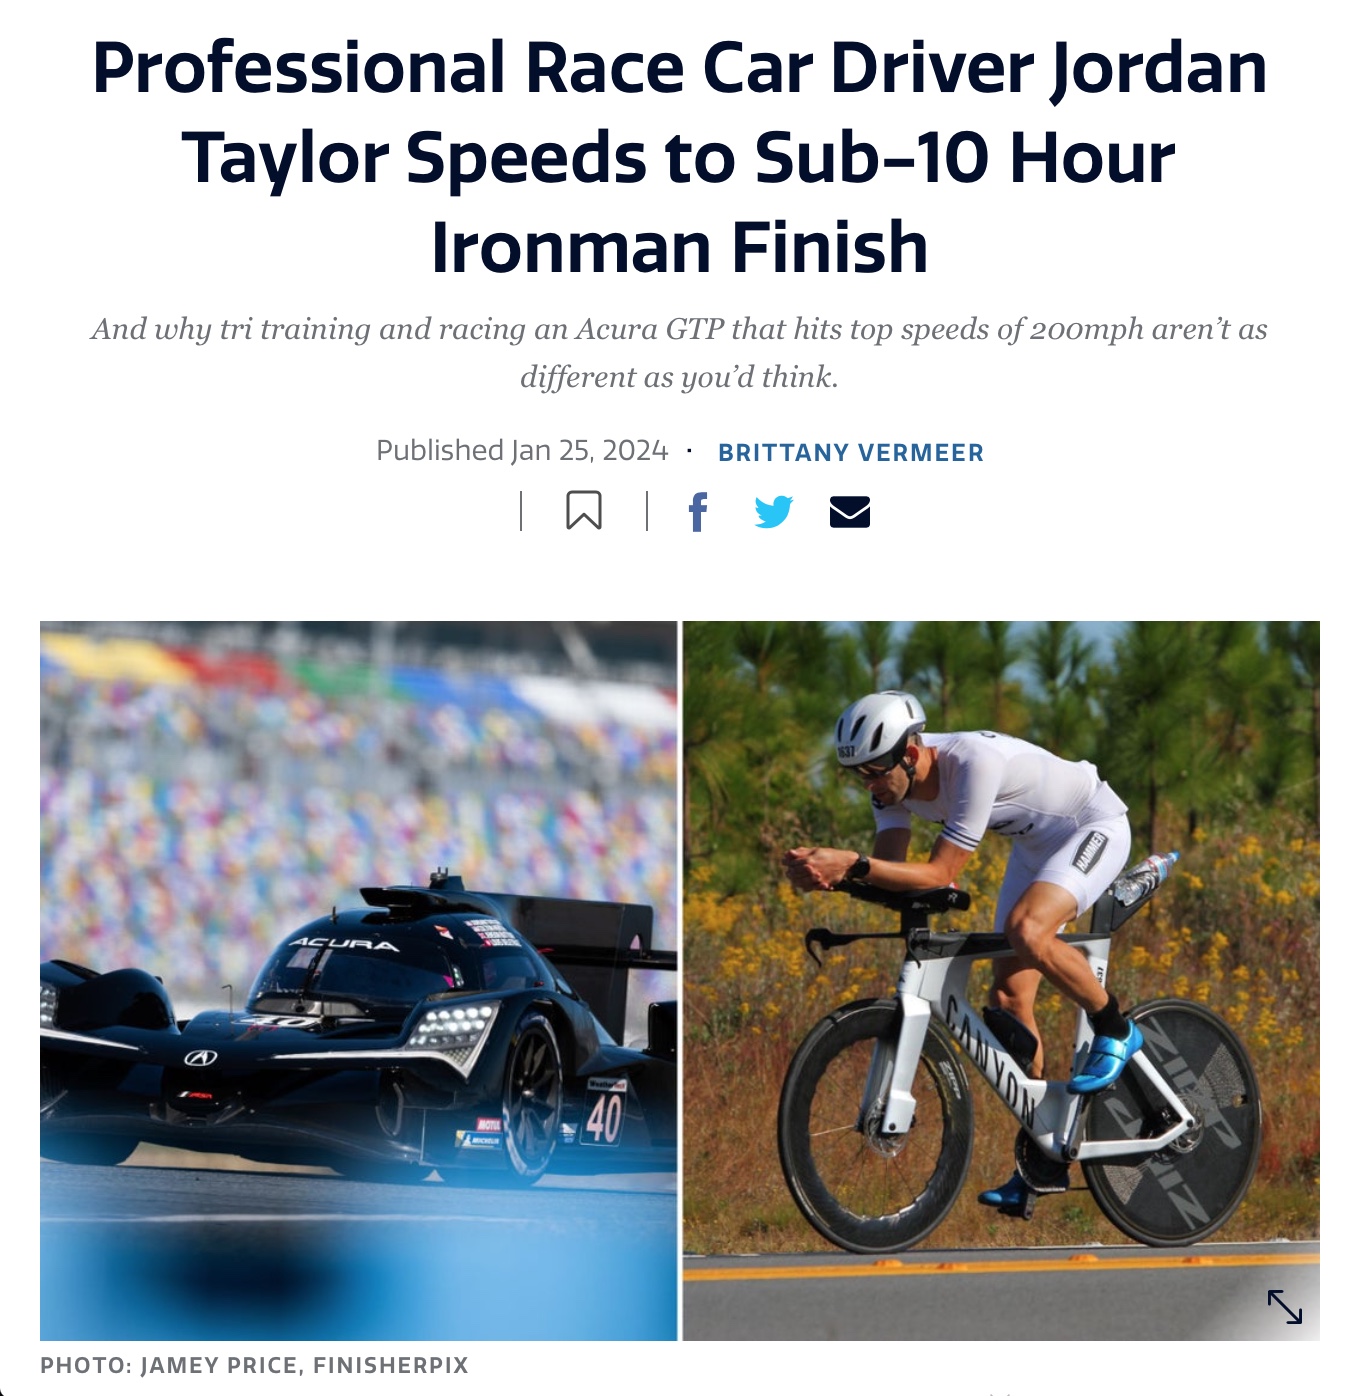 photo of a race car and photo of a male triathlete on a bike